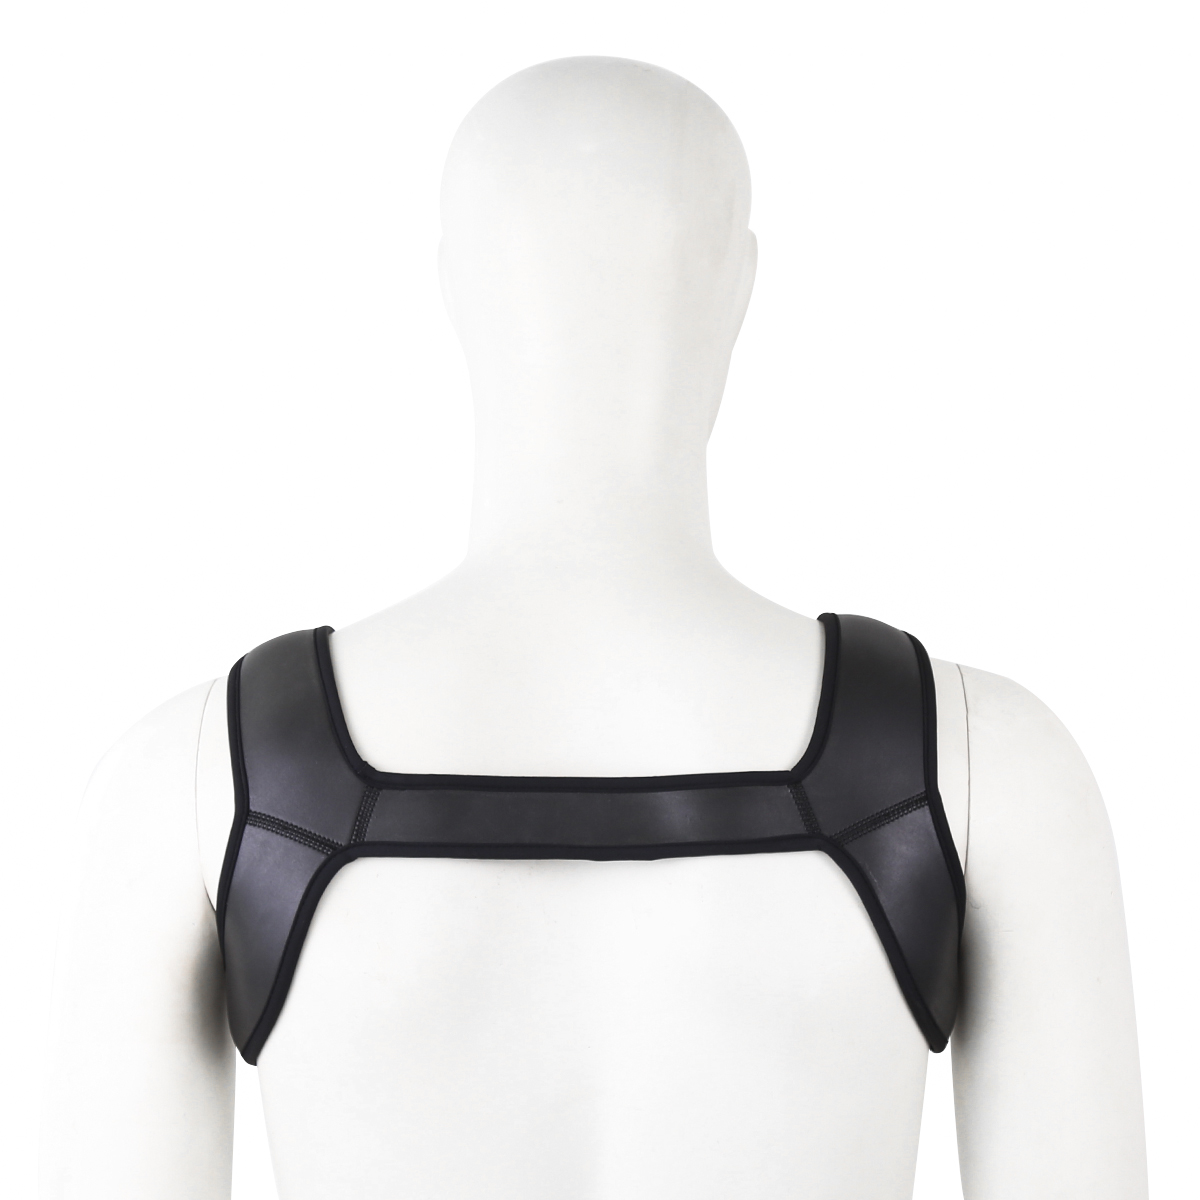 Harness-Sport-Muscle-Protector-M-OPR-321004-3